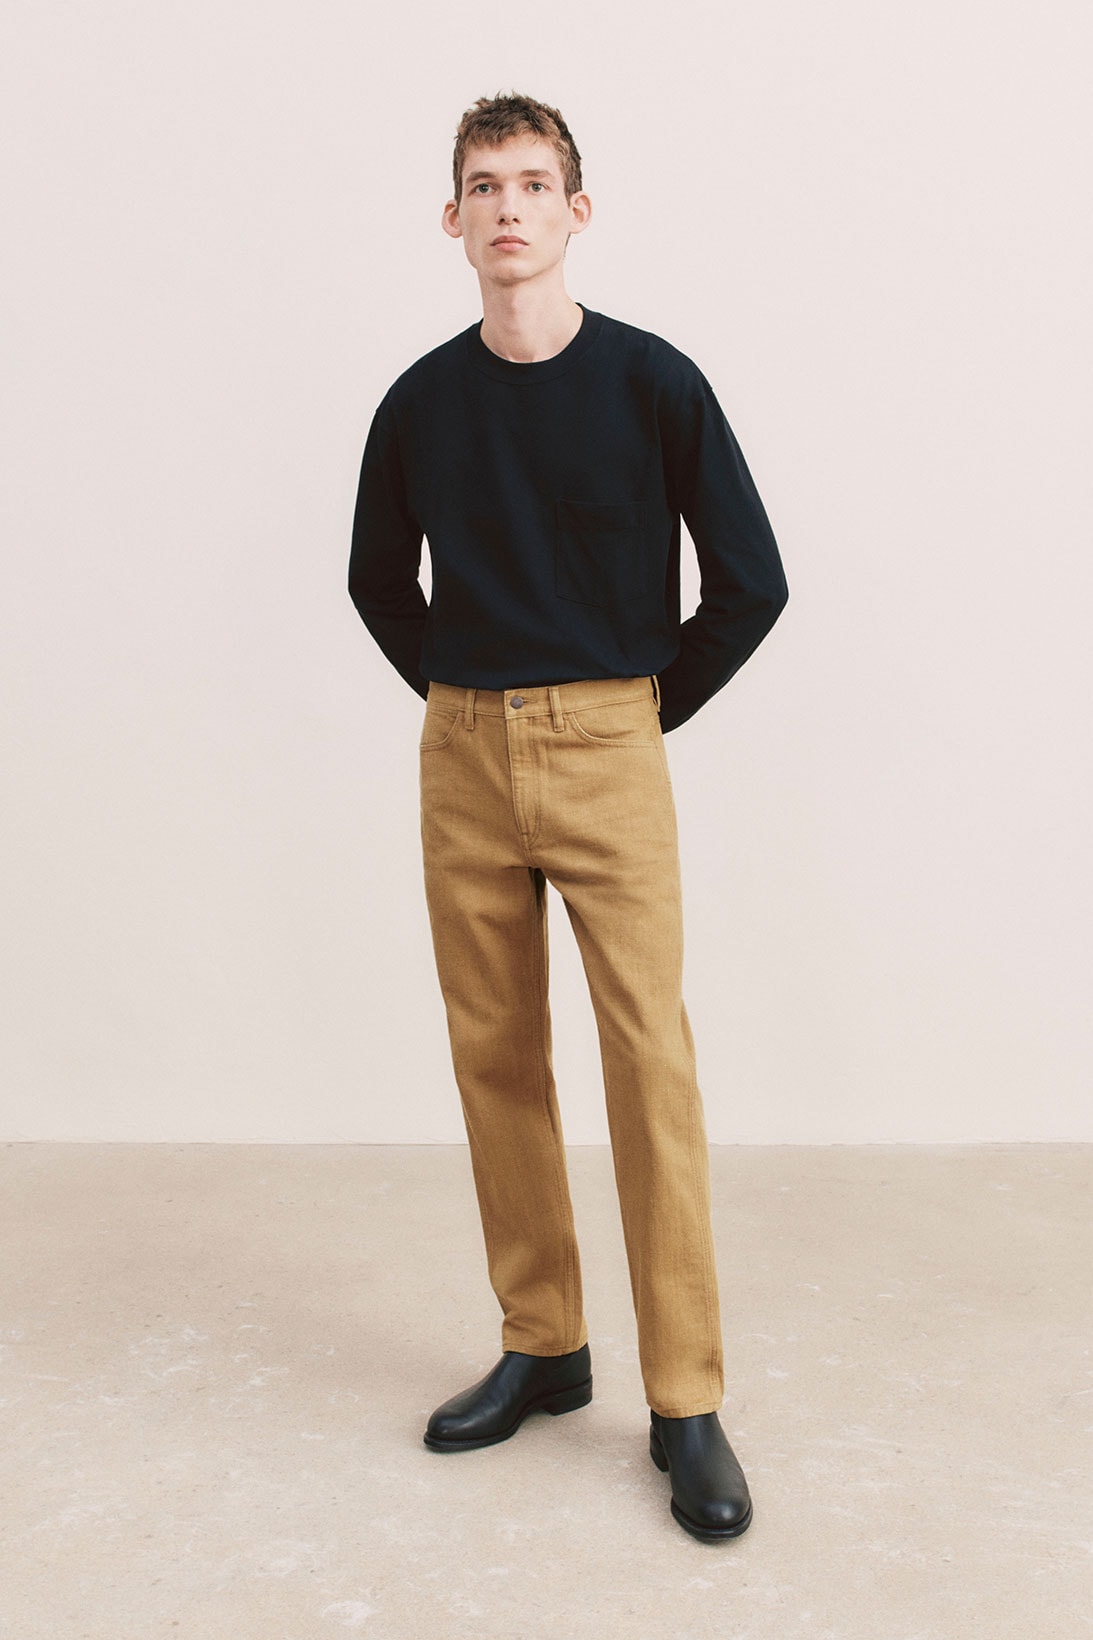 uniqlo u spring summer collection black sweater brown pants shoes